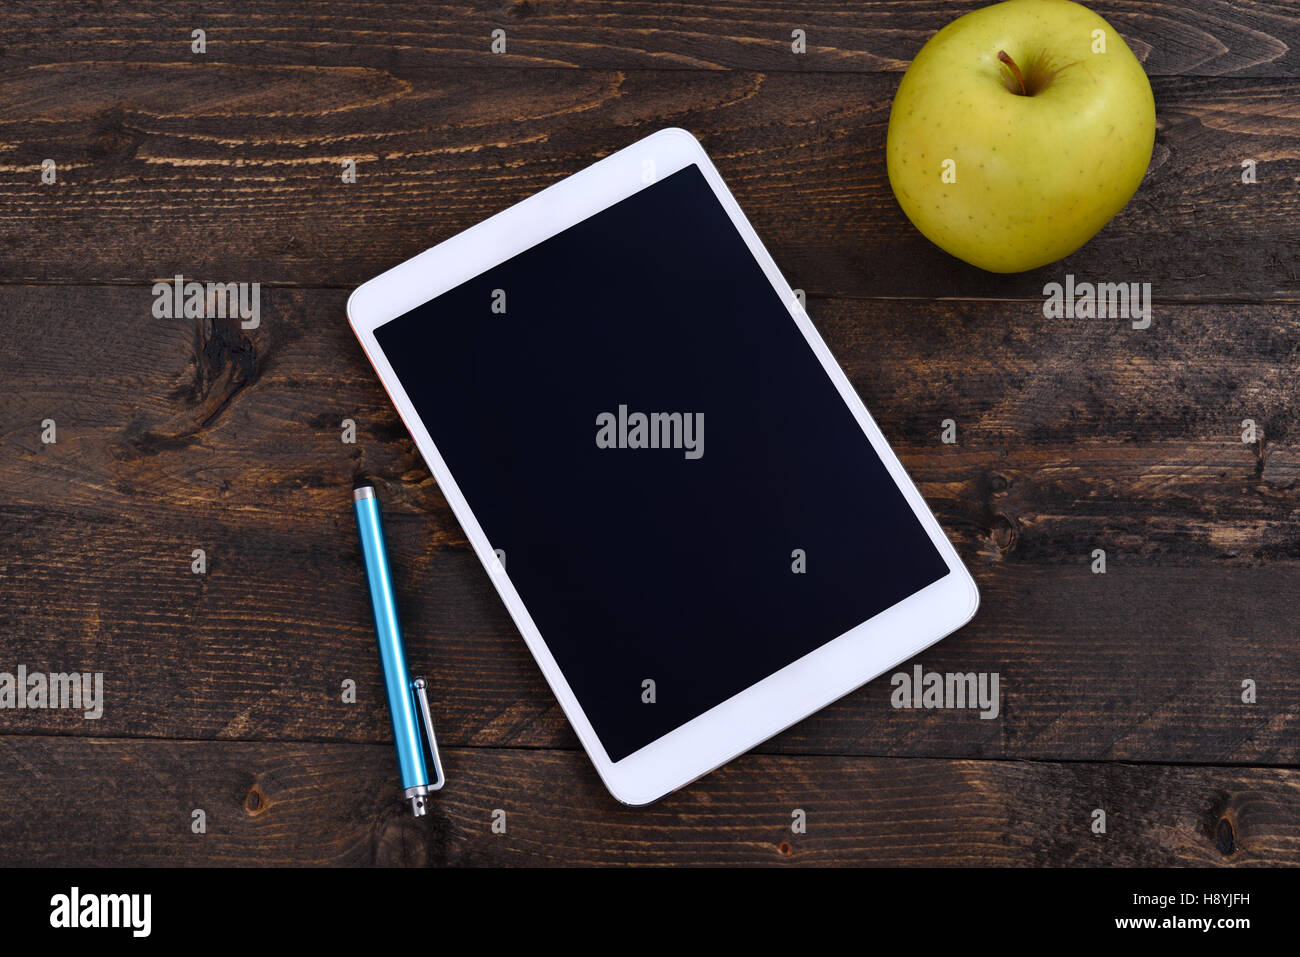 White digital tablet with black screen on wooden table, with a tablet pen and an apple Stock Photo